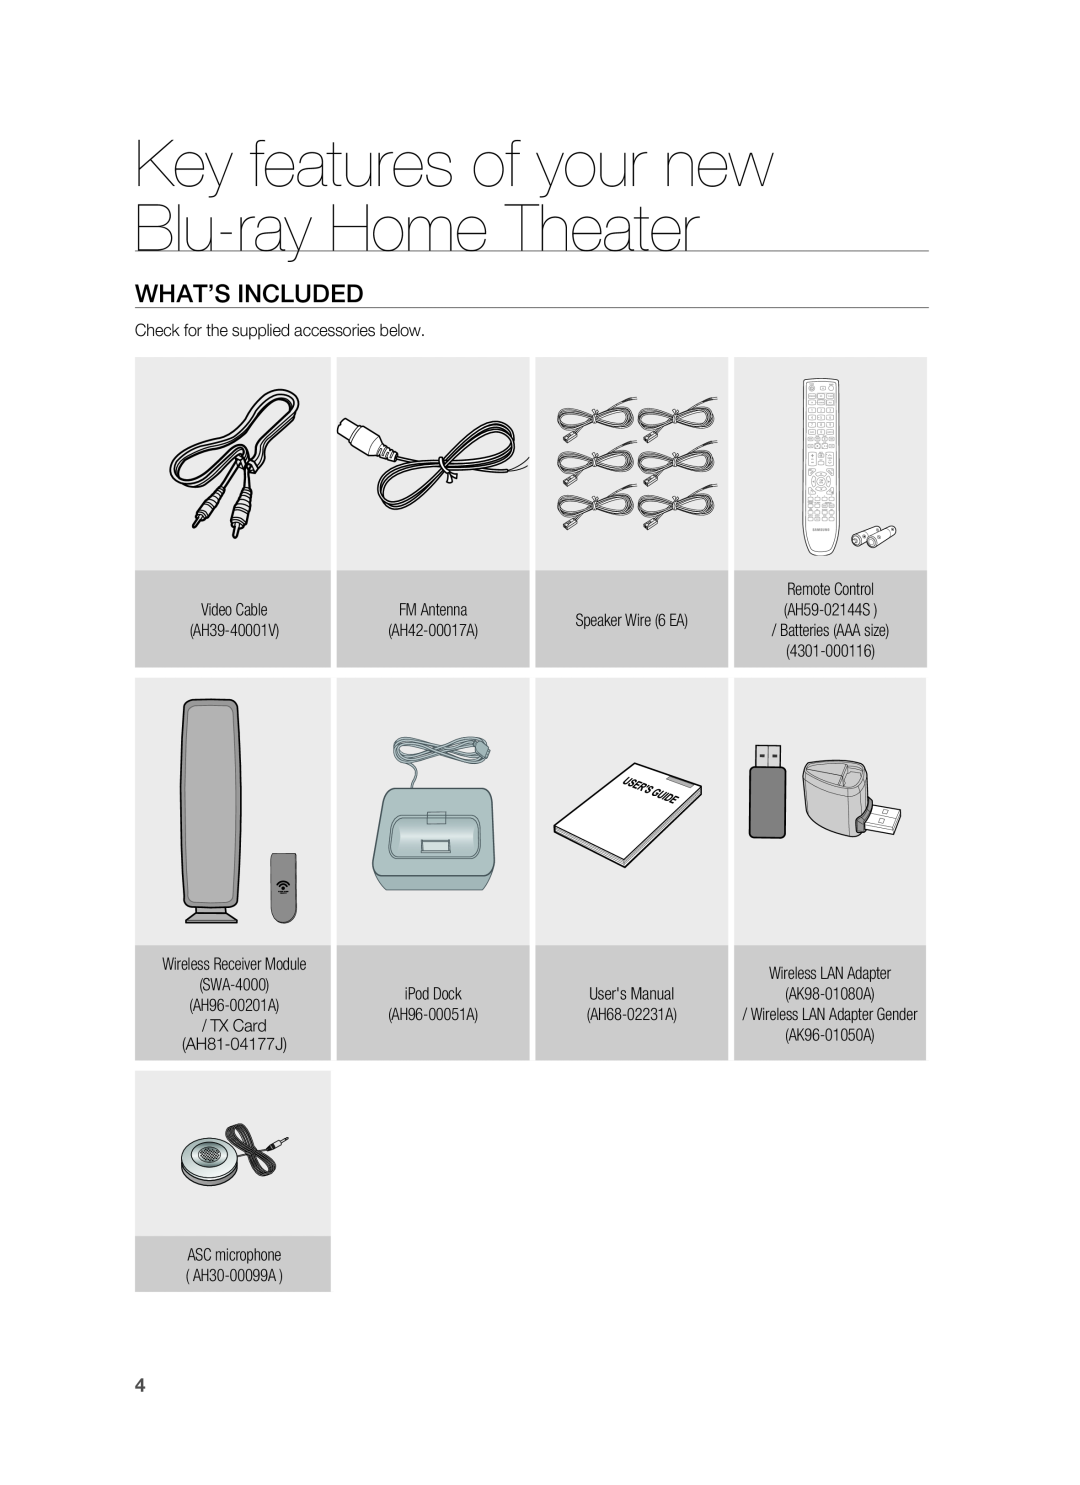 Samsung HT-BD3252 What’S Included, Key features of your new Blu-rayHome Theater, Check for the supplied accessories below 